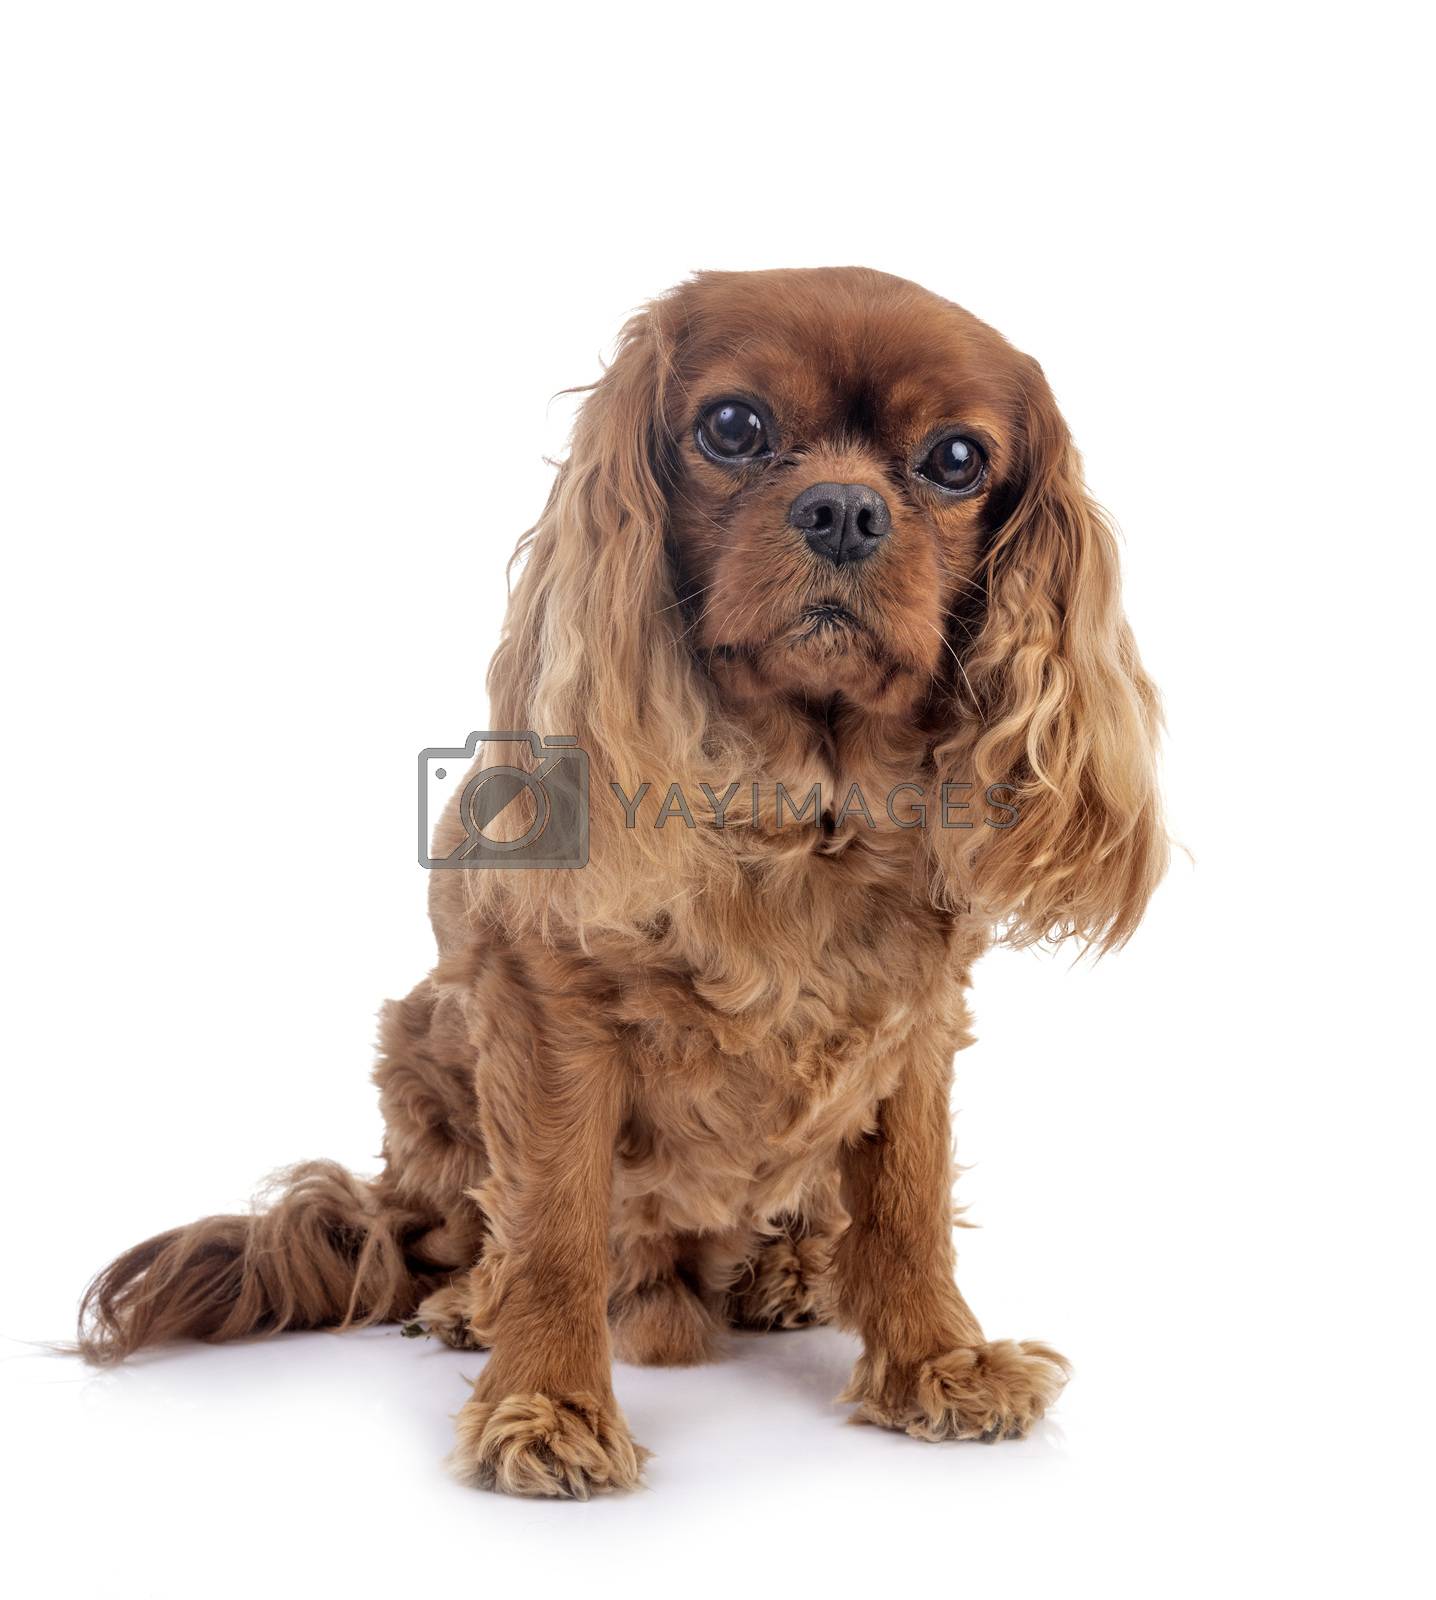 Royalty free image of cavalier king charles by cynoclub